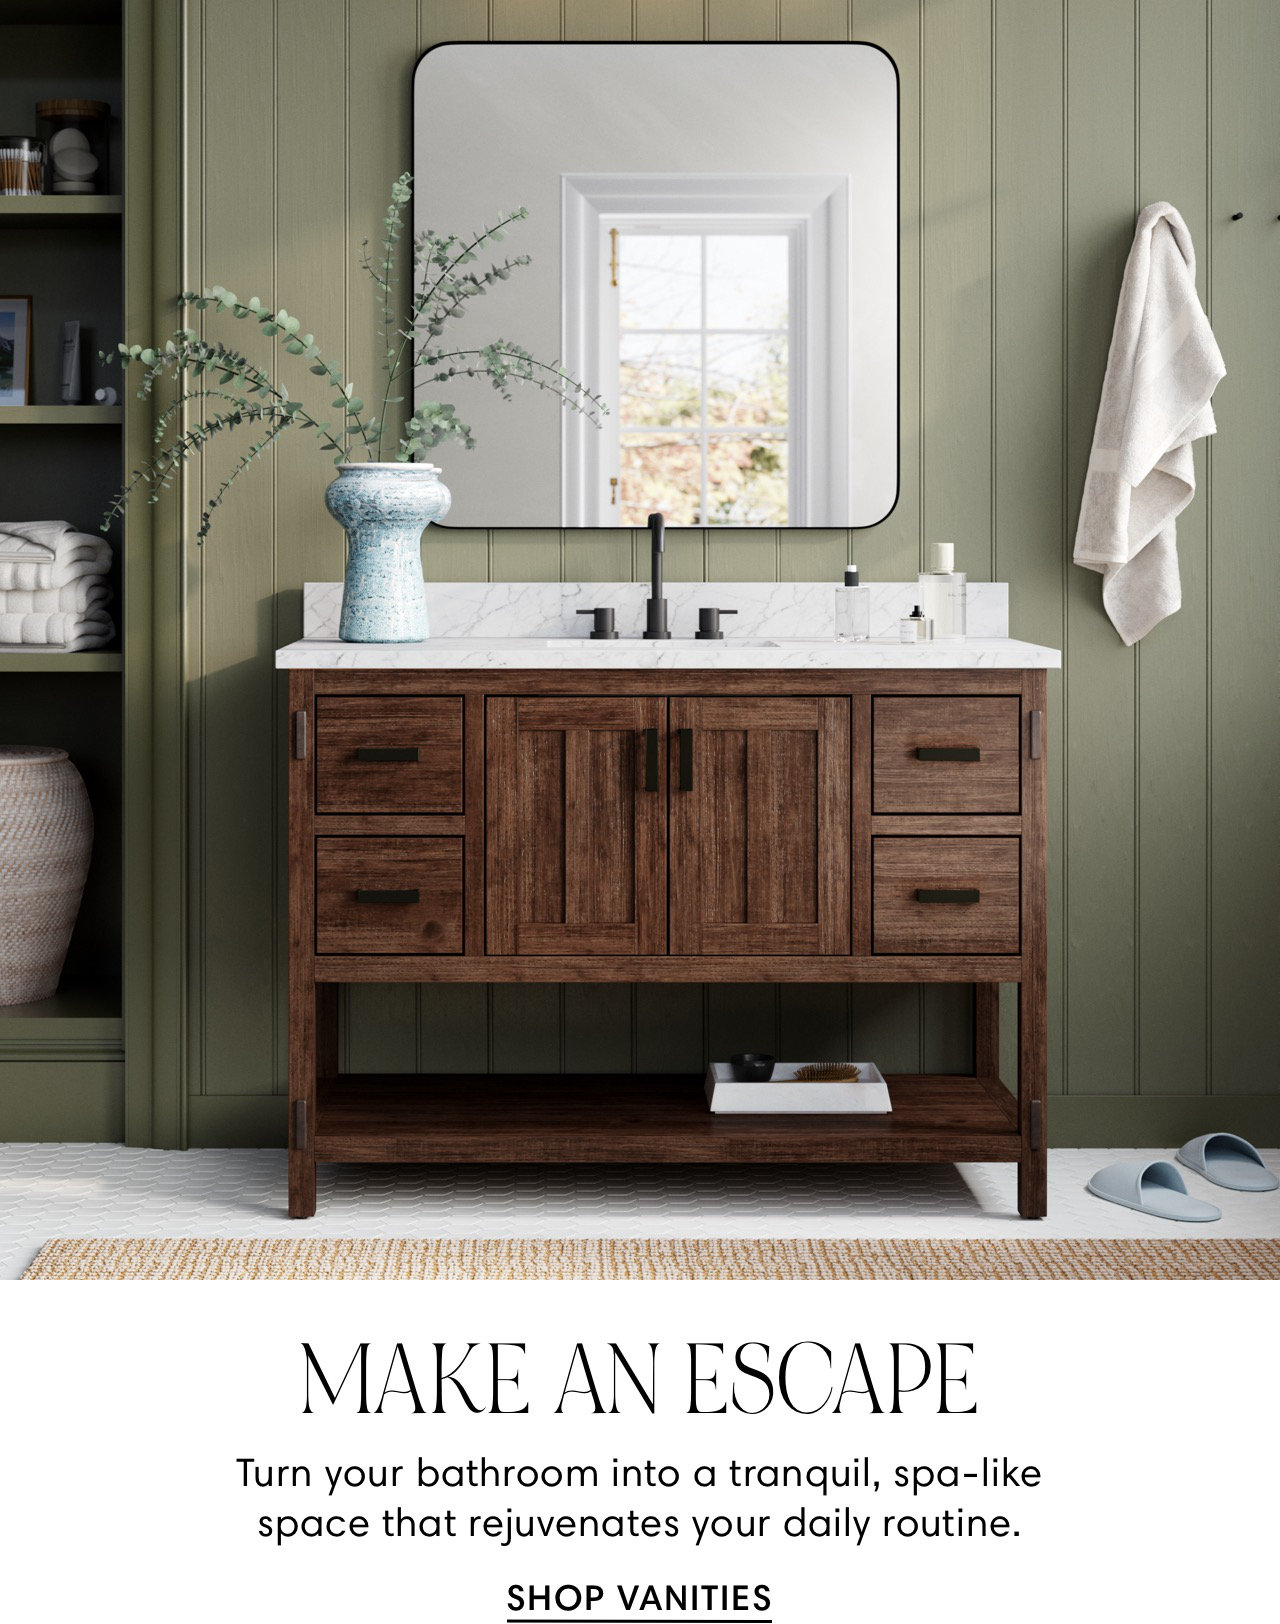  MAKE AN ESCAPE Turn your bathroom into a tranquil, spa-like space that rejuvenates your daily routine. SHOP VANITIES 